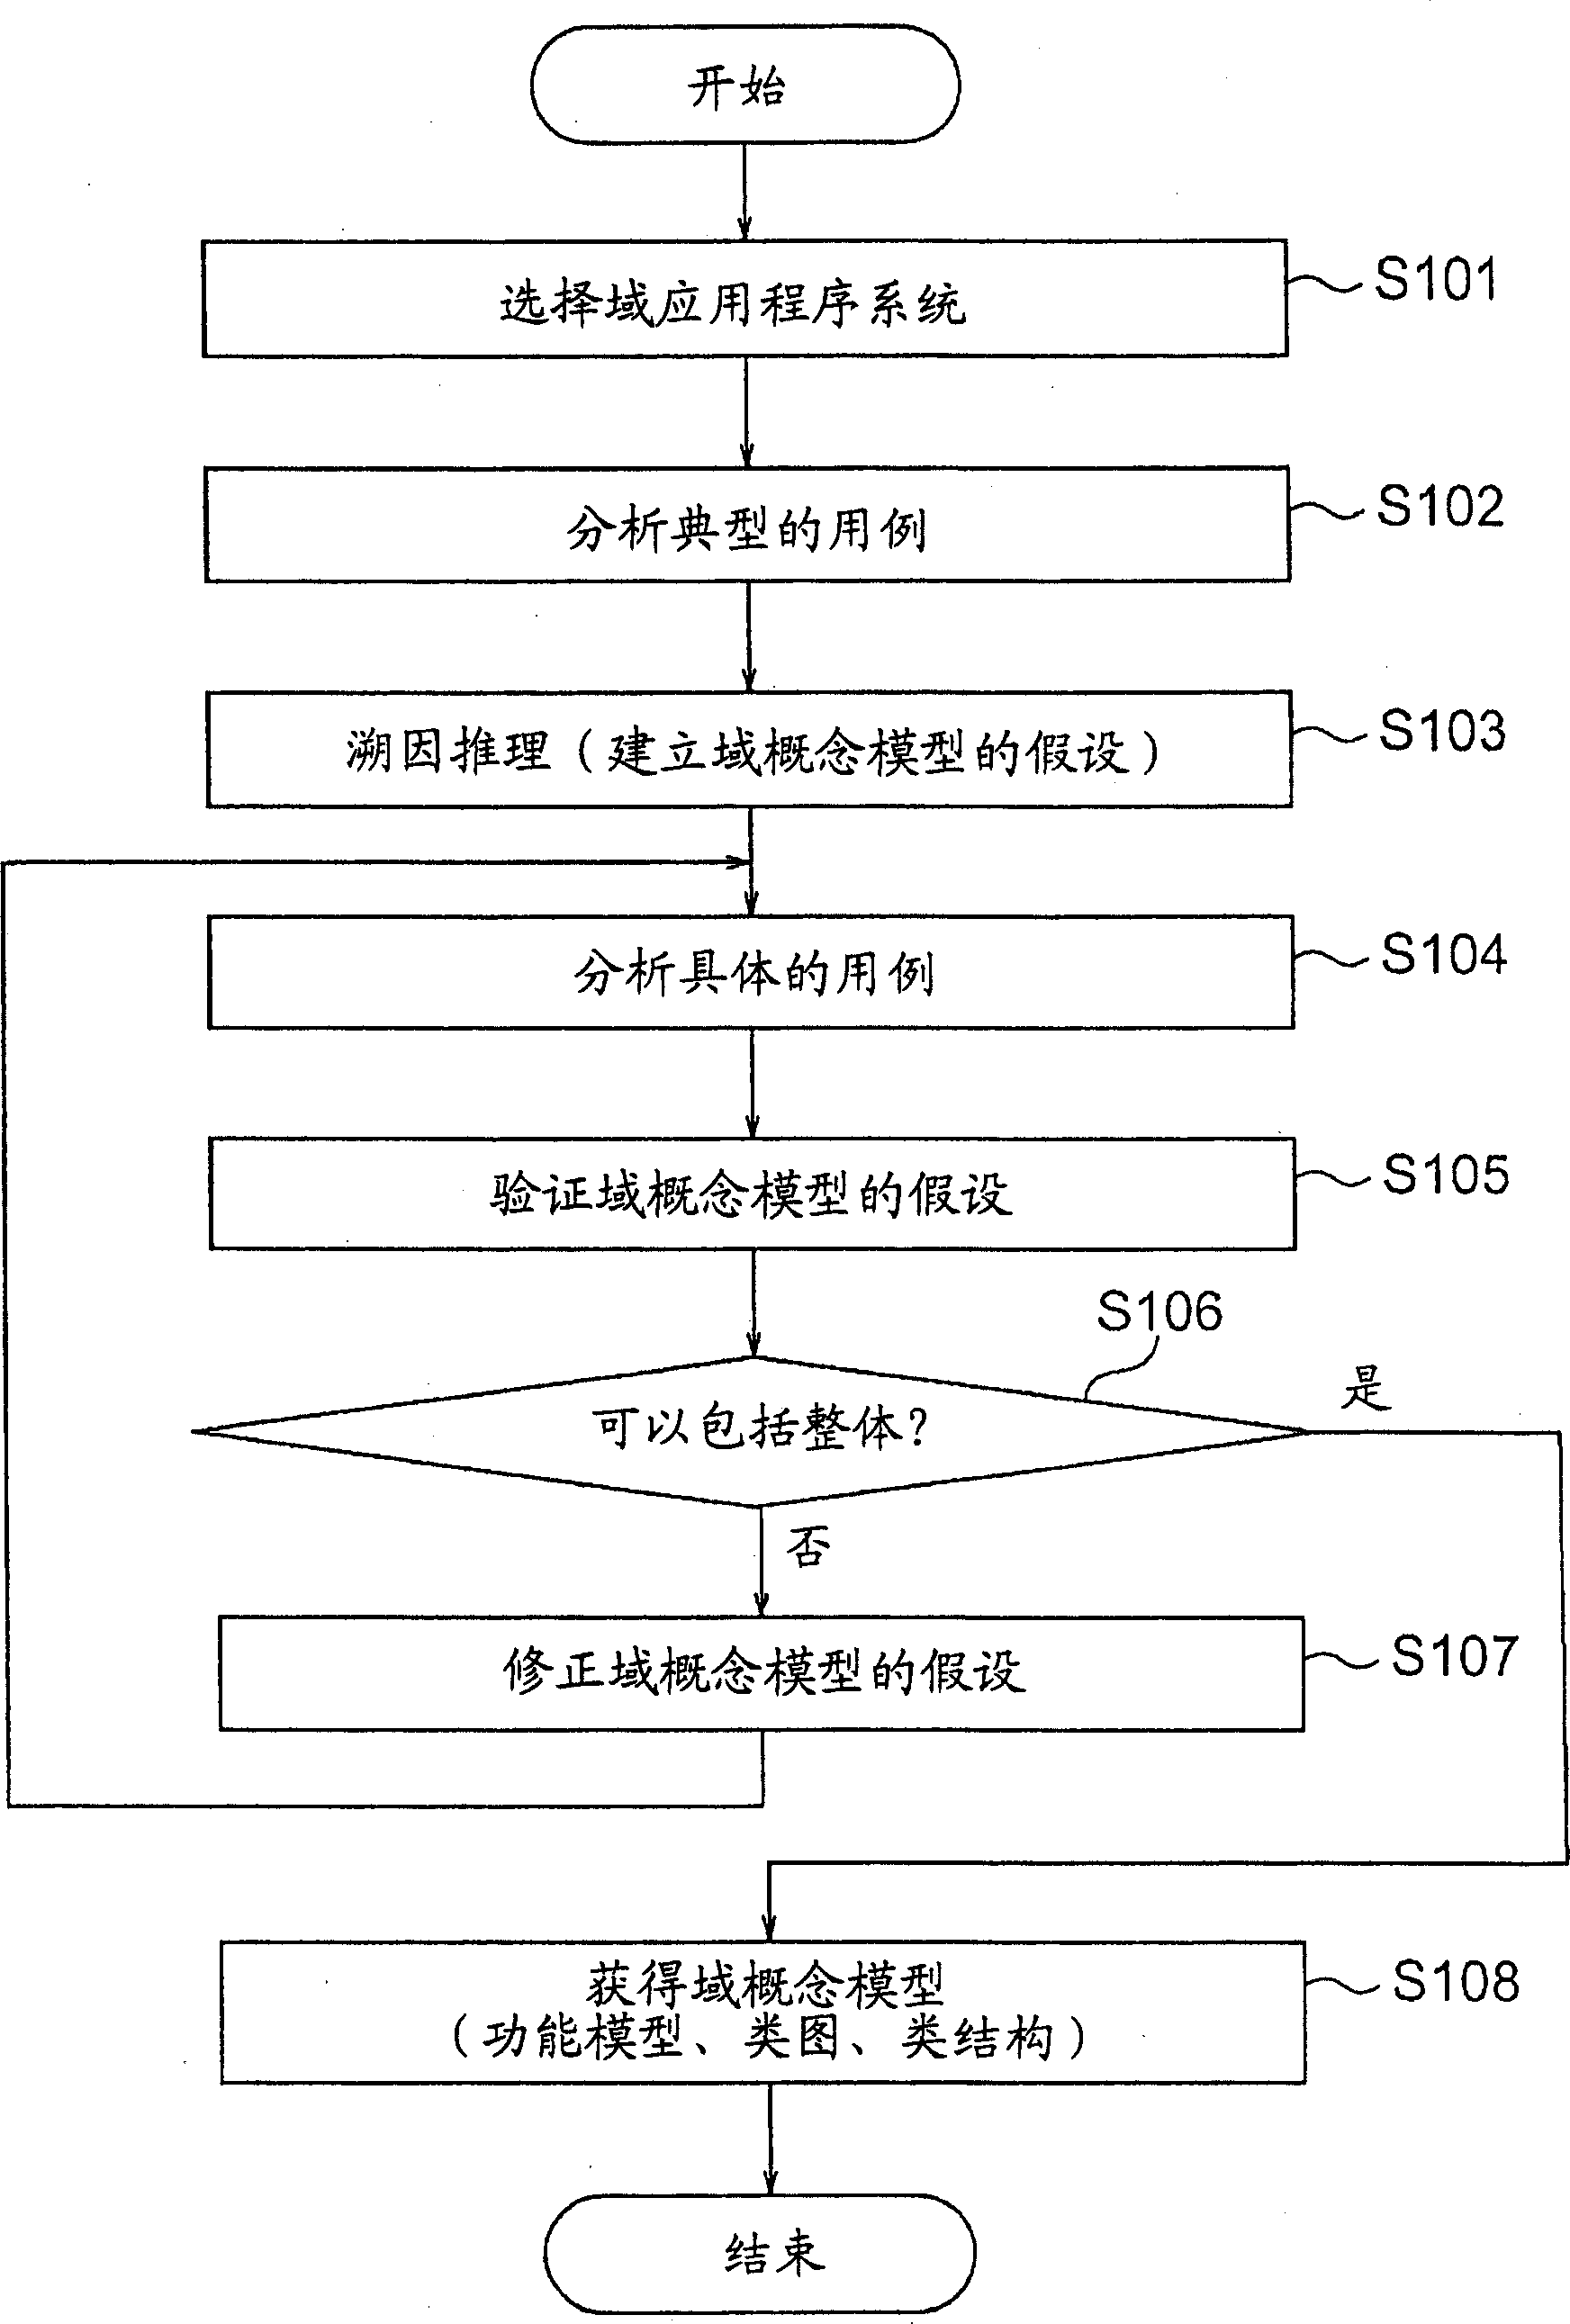 Device and method for retrieving software unit for use in manufacture industries